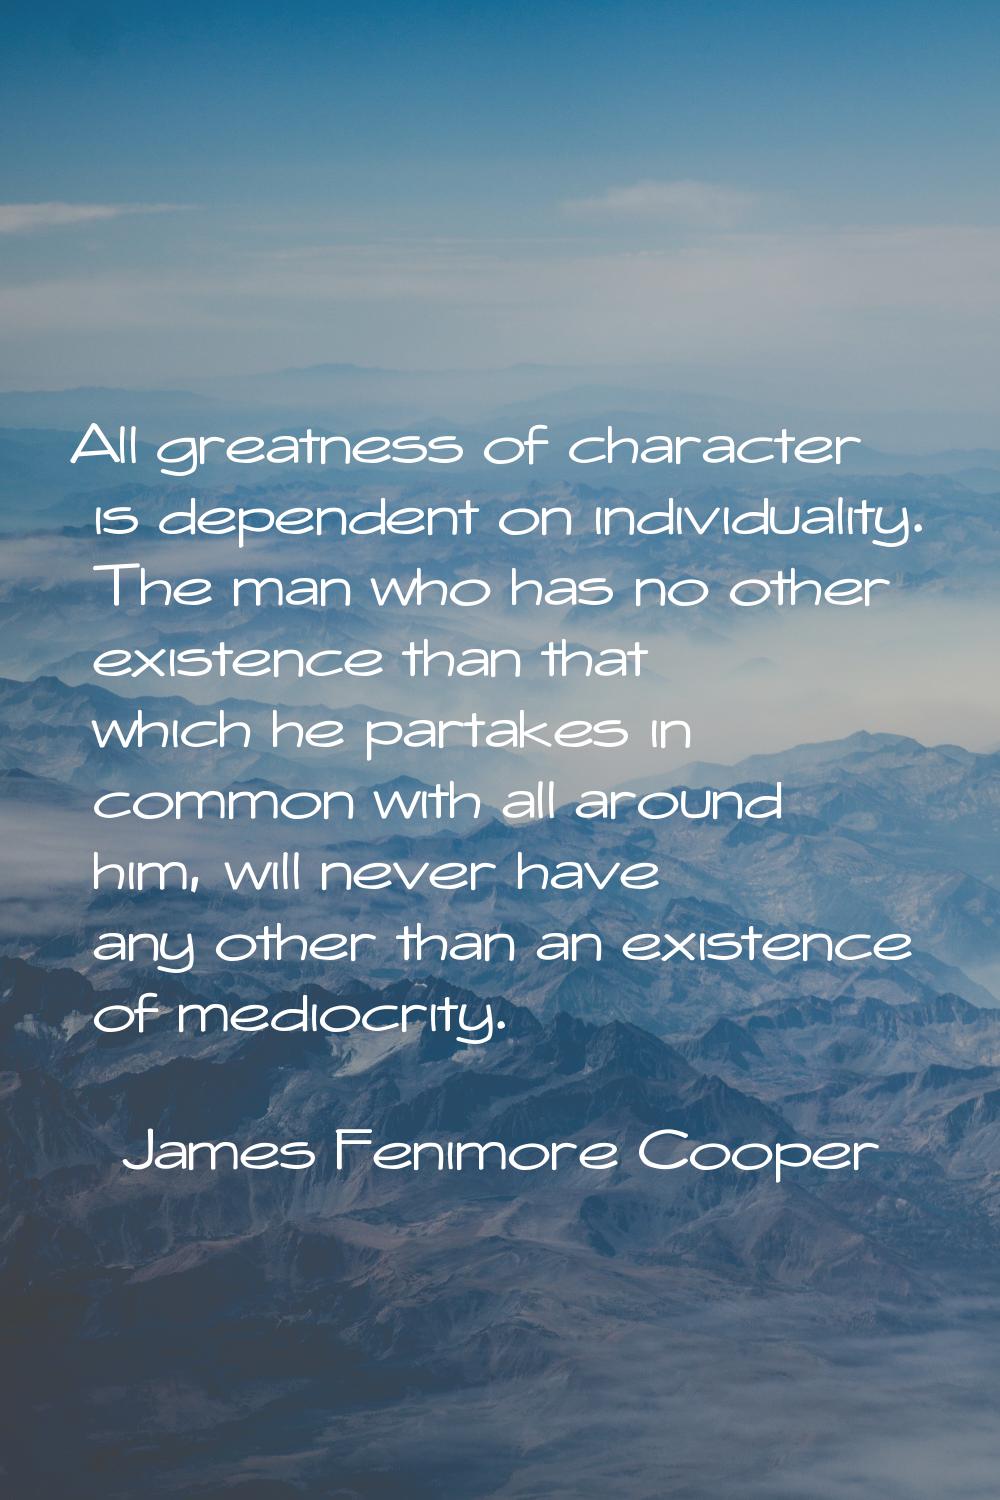 All greatness of character is dependent on individuality. The man who has no other existence than t